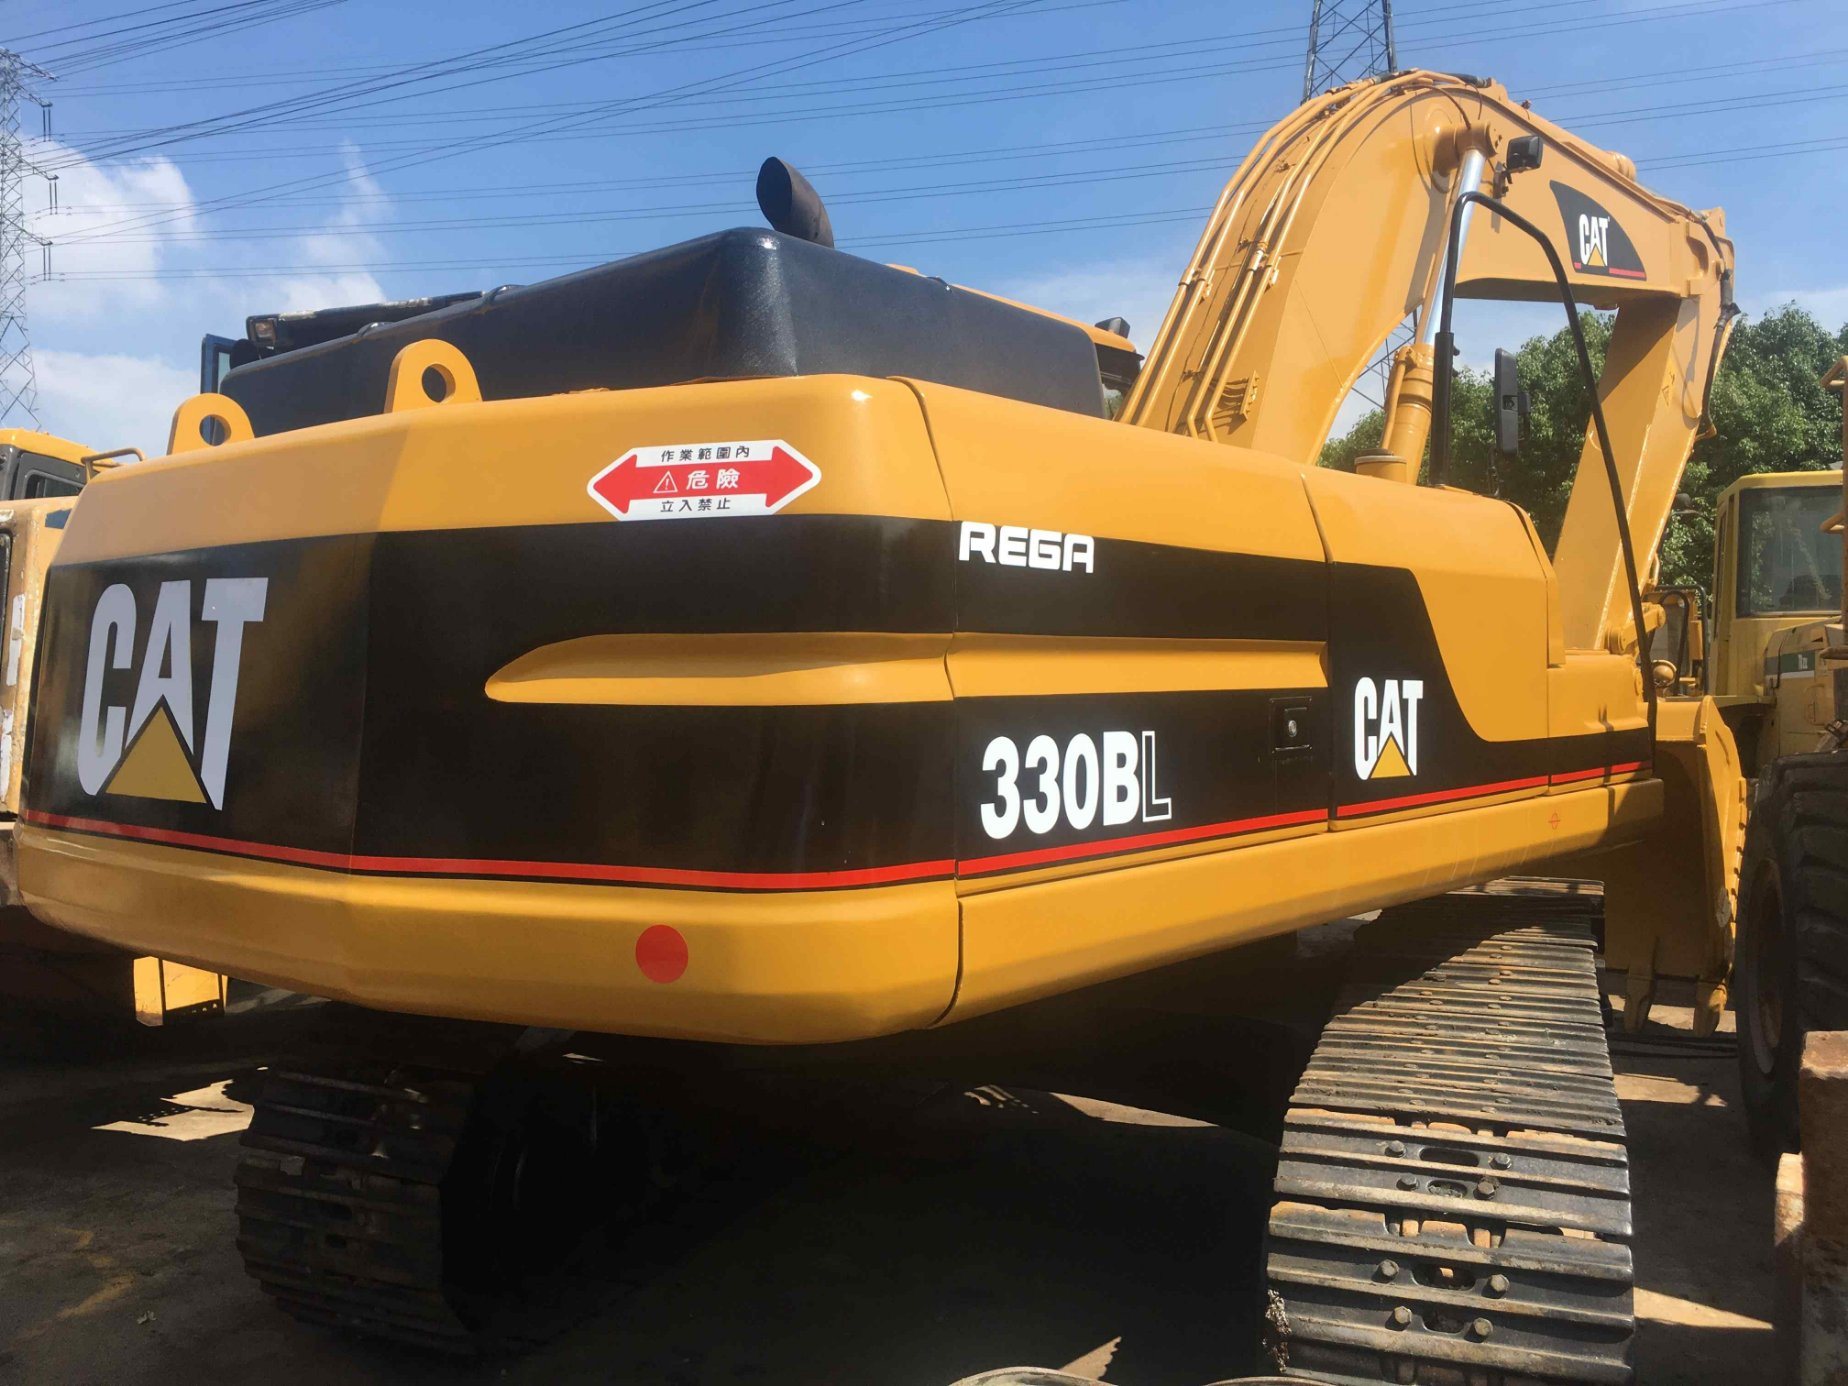 Used Cat 330bl Crawler Excavator, Secondhand Caterpillar 330bl Excavator with High Quality in Cheap Price